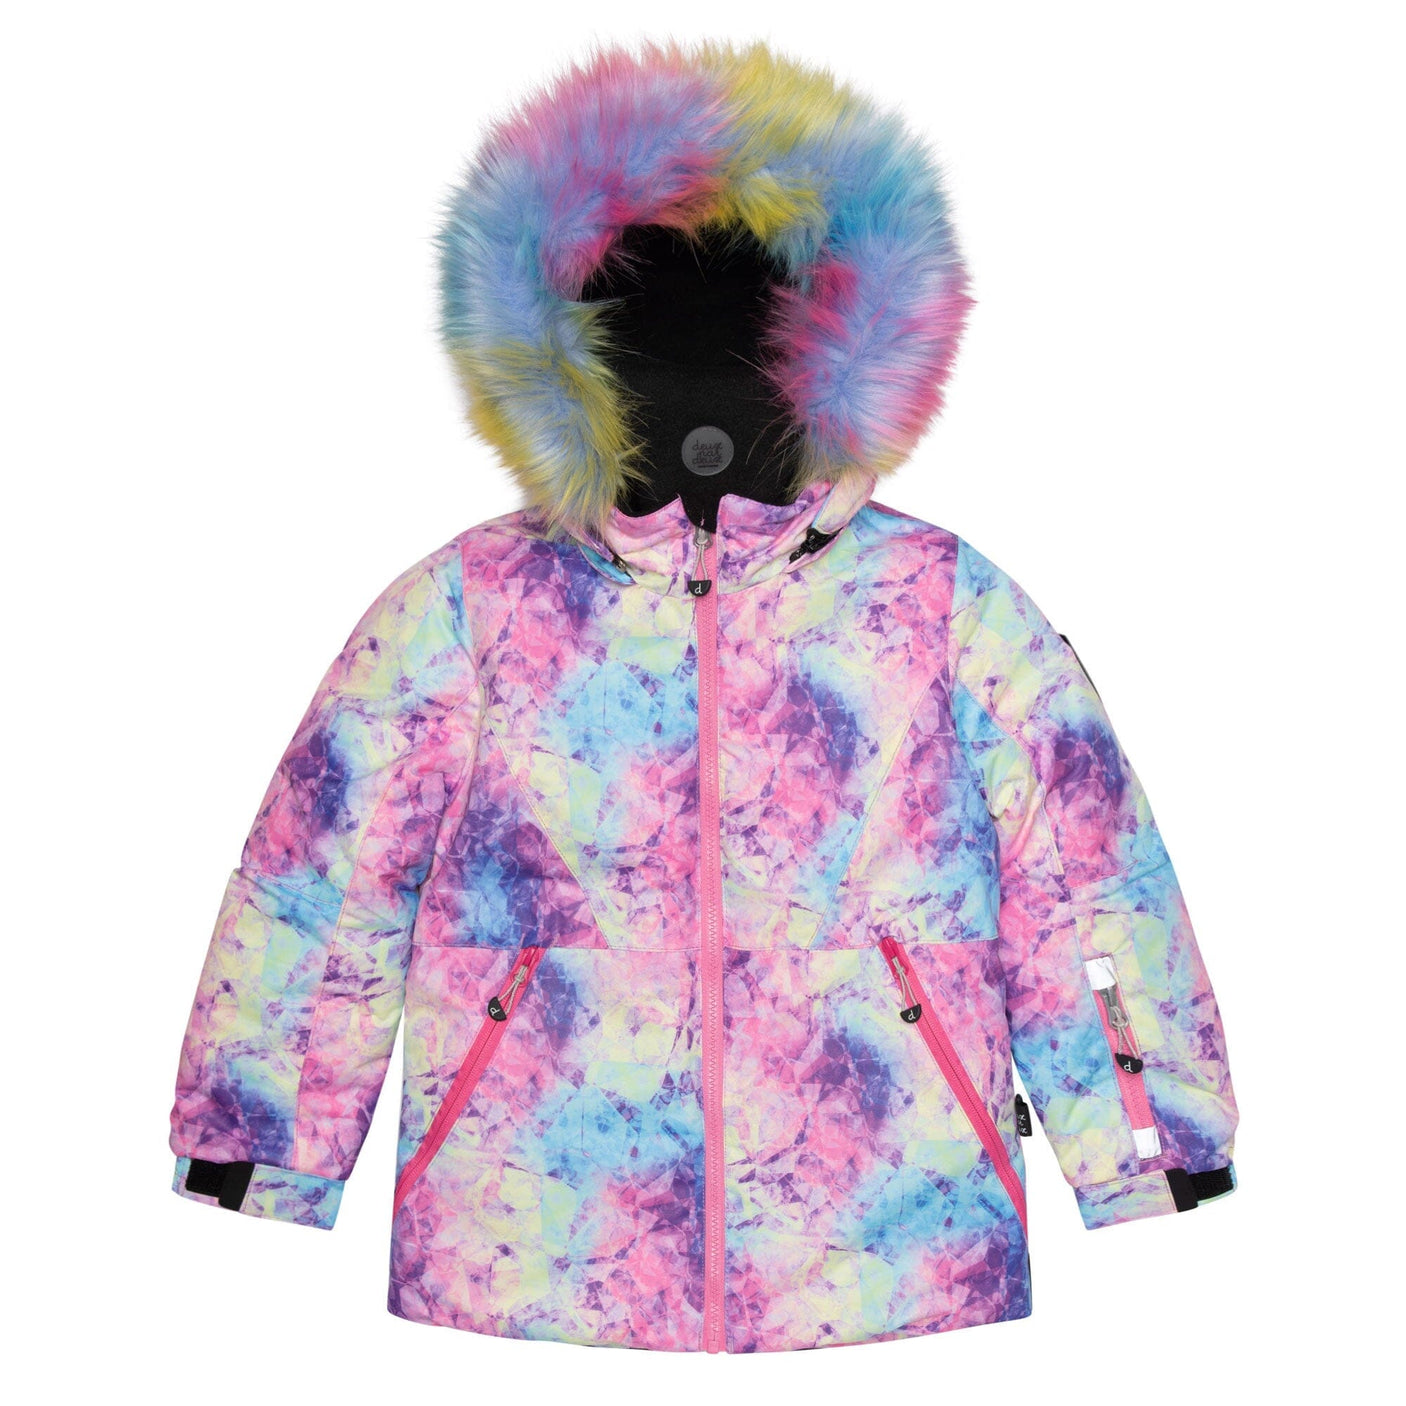 Two Piece Snowsuit Frosted Rainbow Print With Black Pant-3